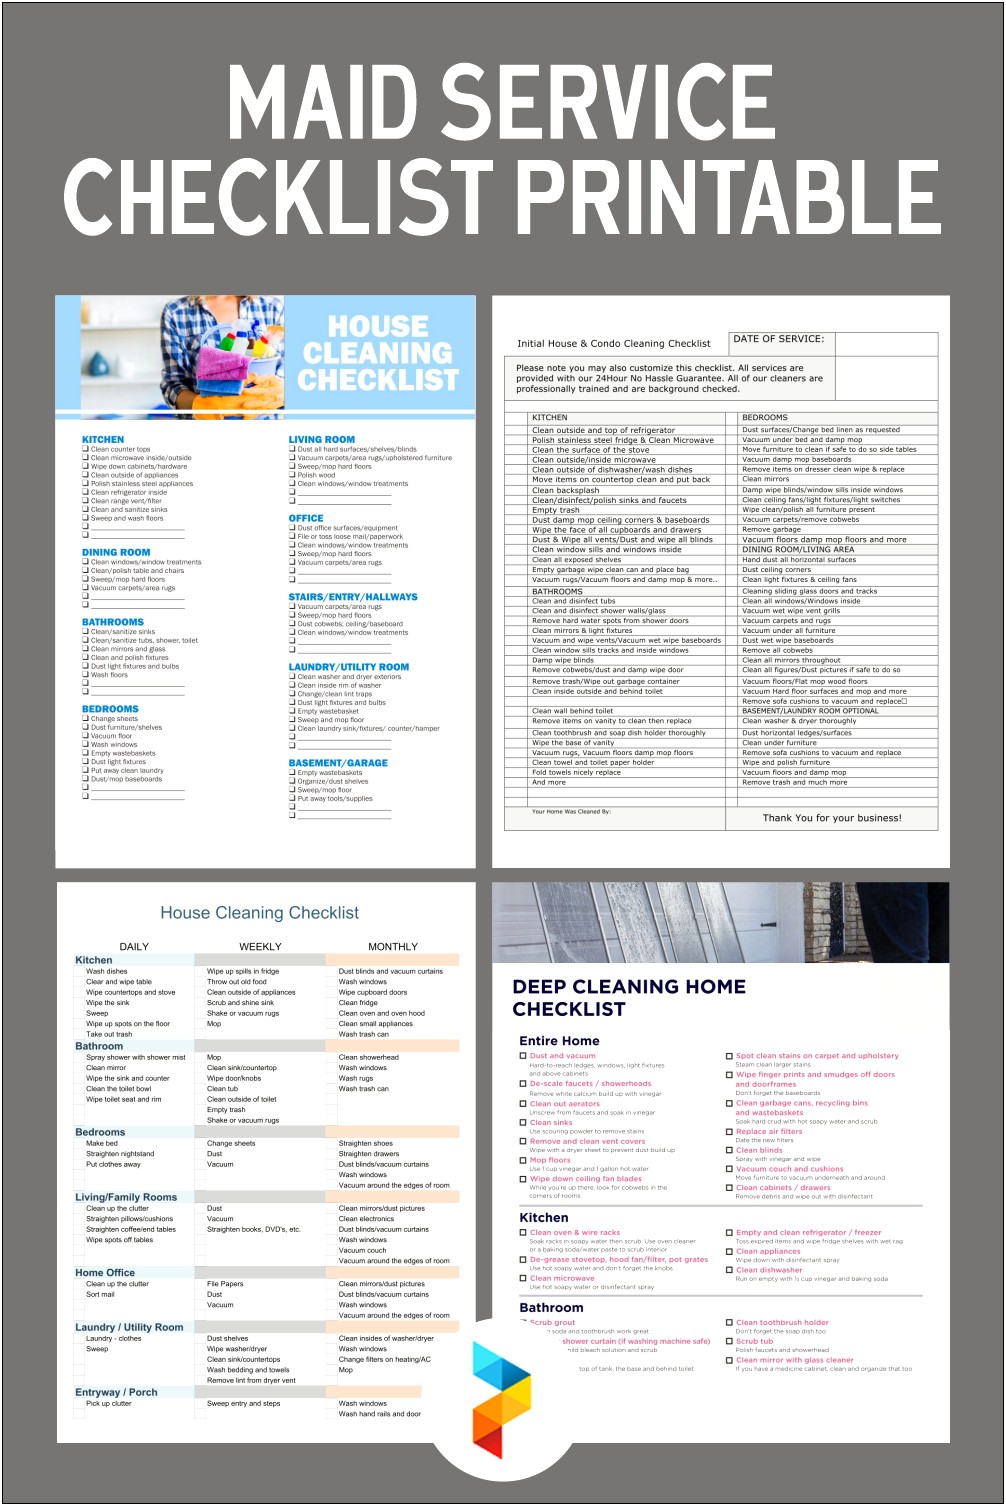 Free Medical Office Cleaning Checklist Templates Templates Resume Designs qagpGV6vmp